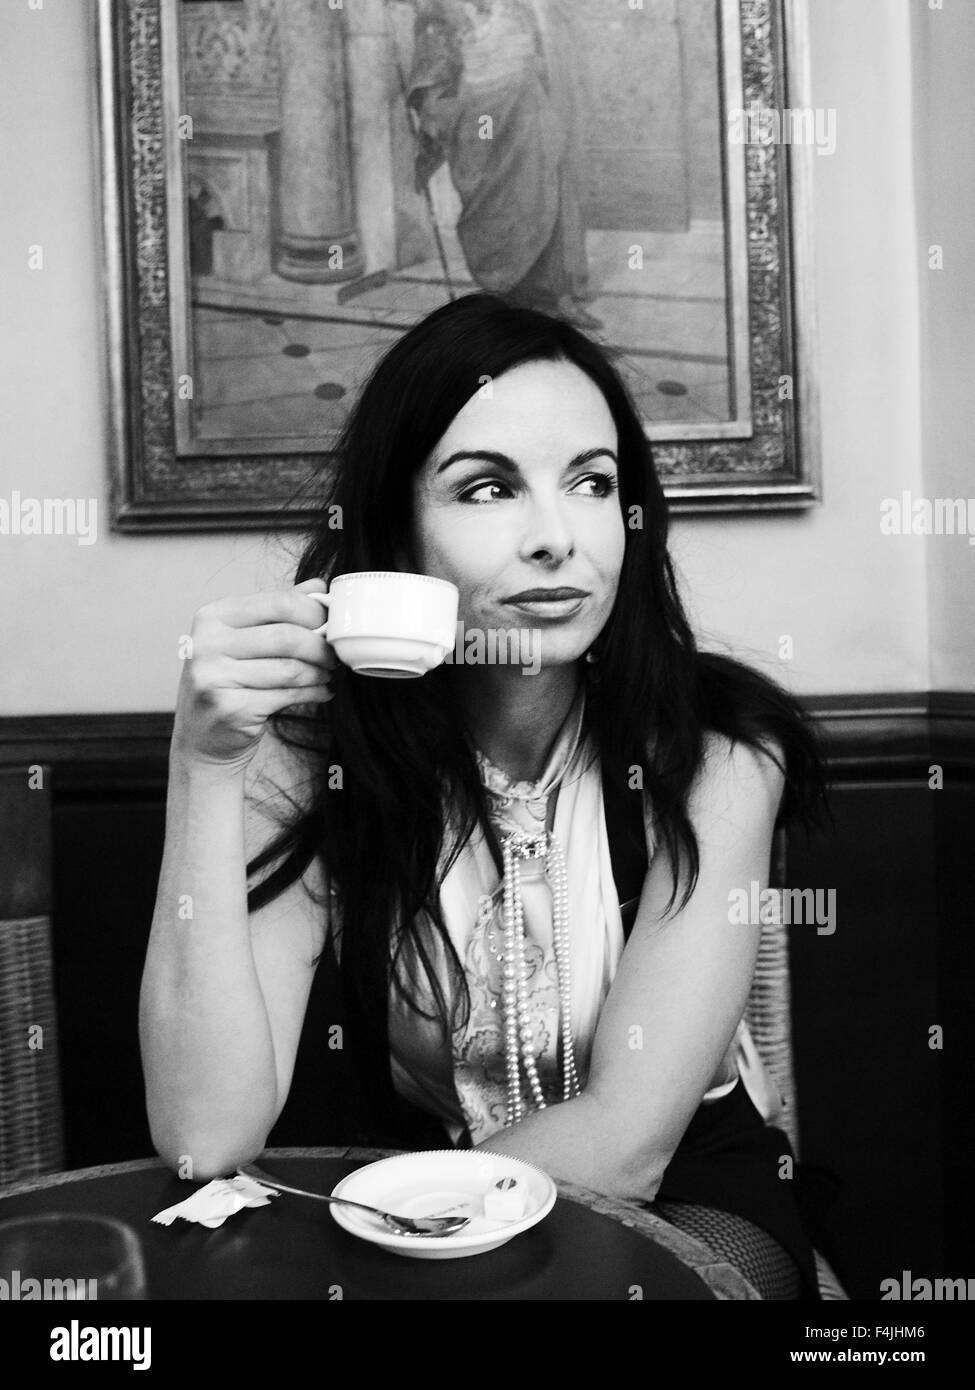 France, Paris, young woman drinking coffee in cafe Banque D'Images